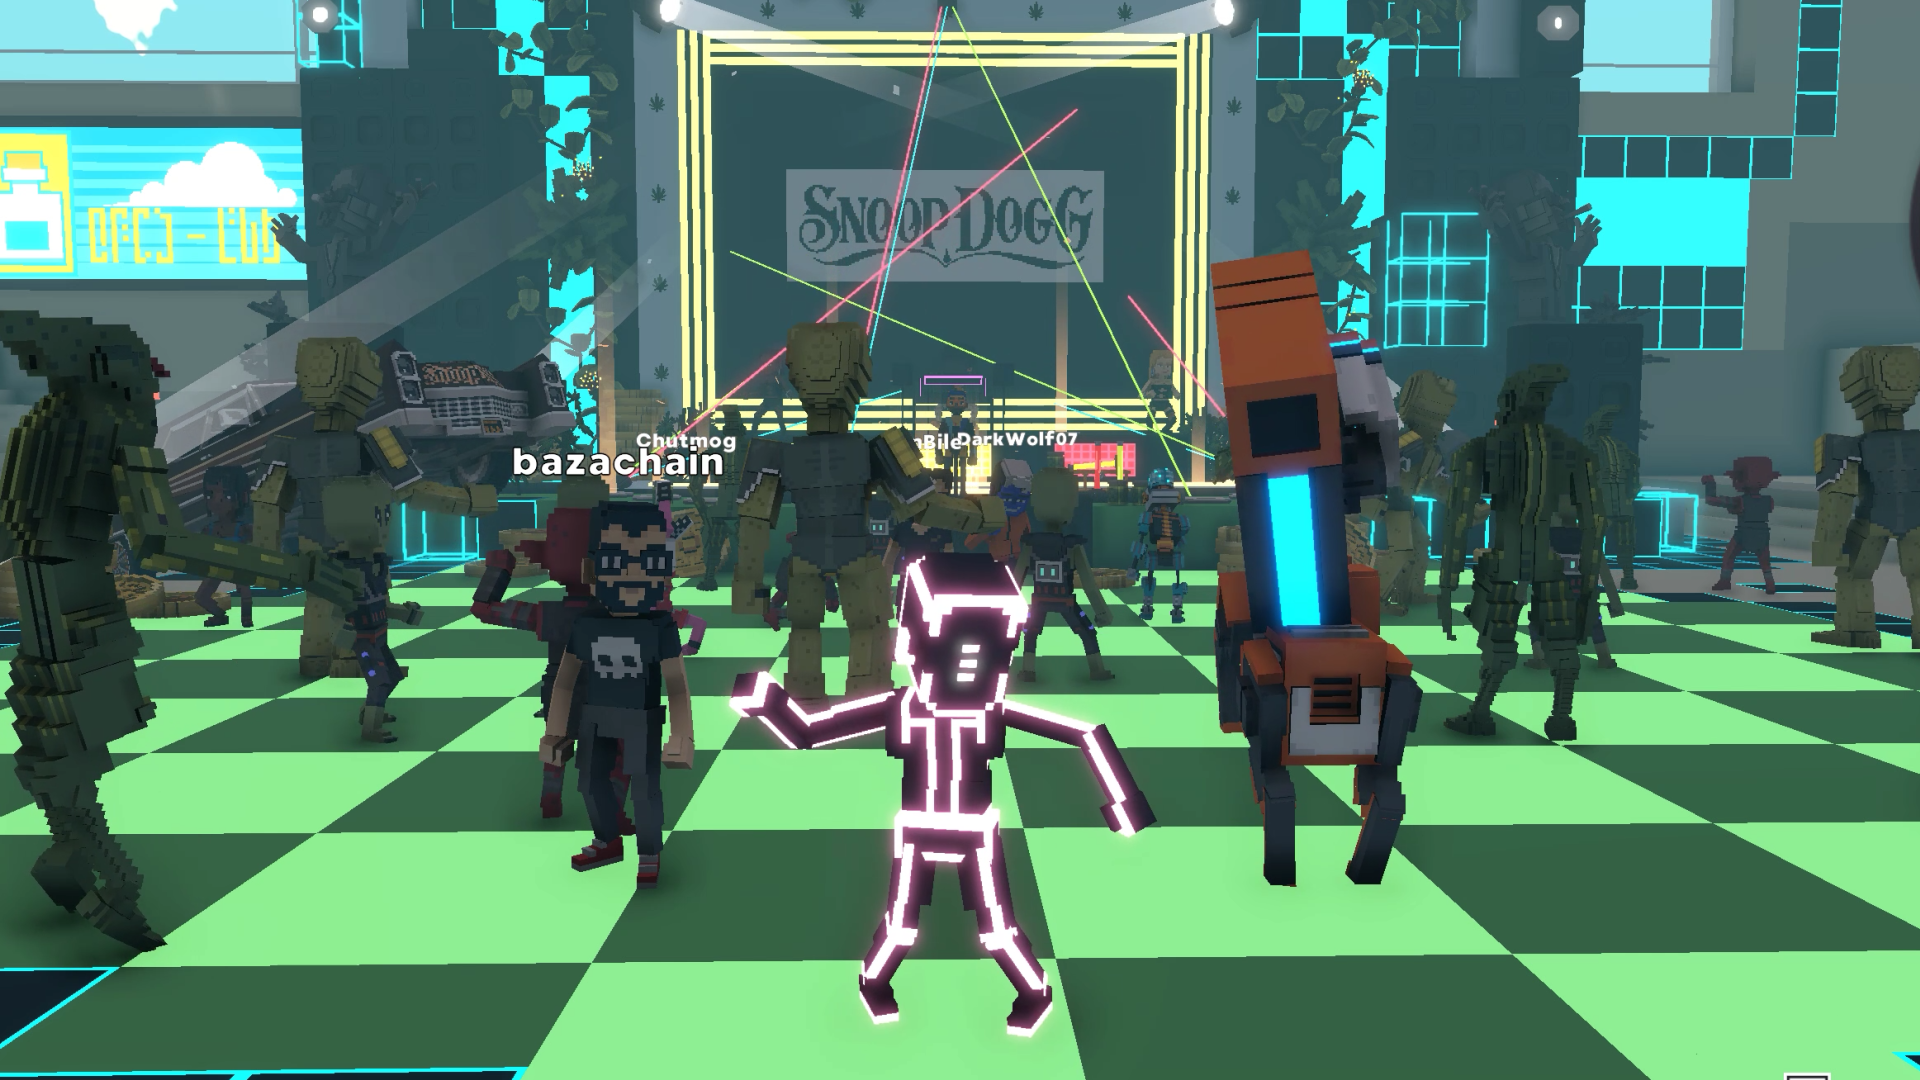 A virtual concert hall with blocky avatars dancing in front of a Snoop Dogg sign.